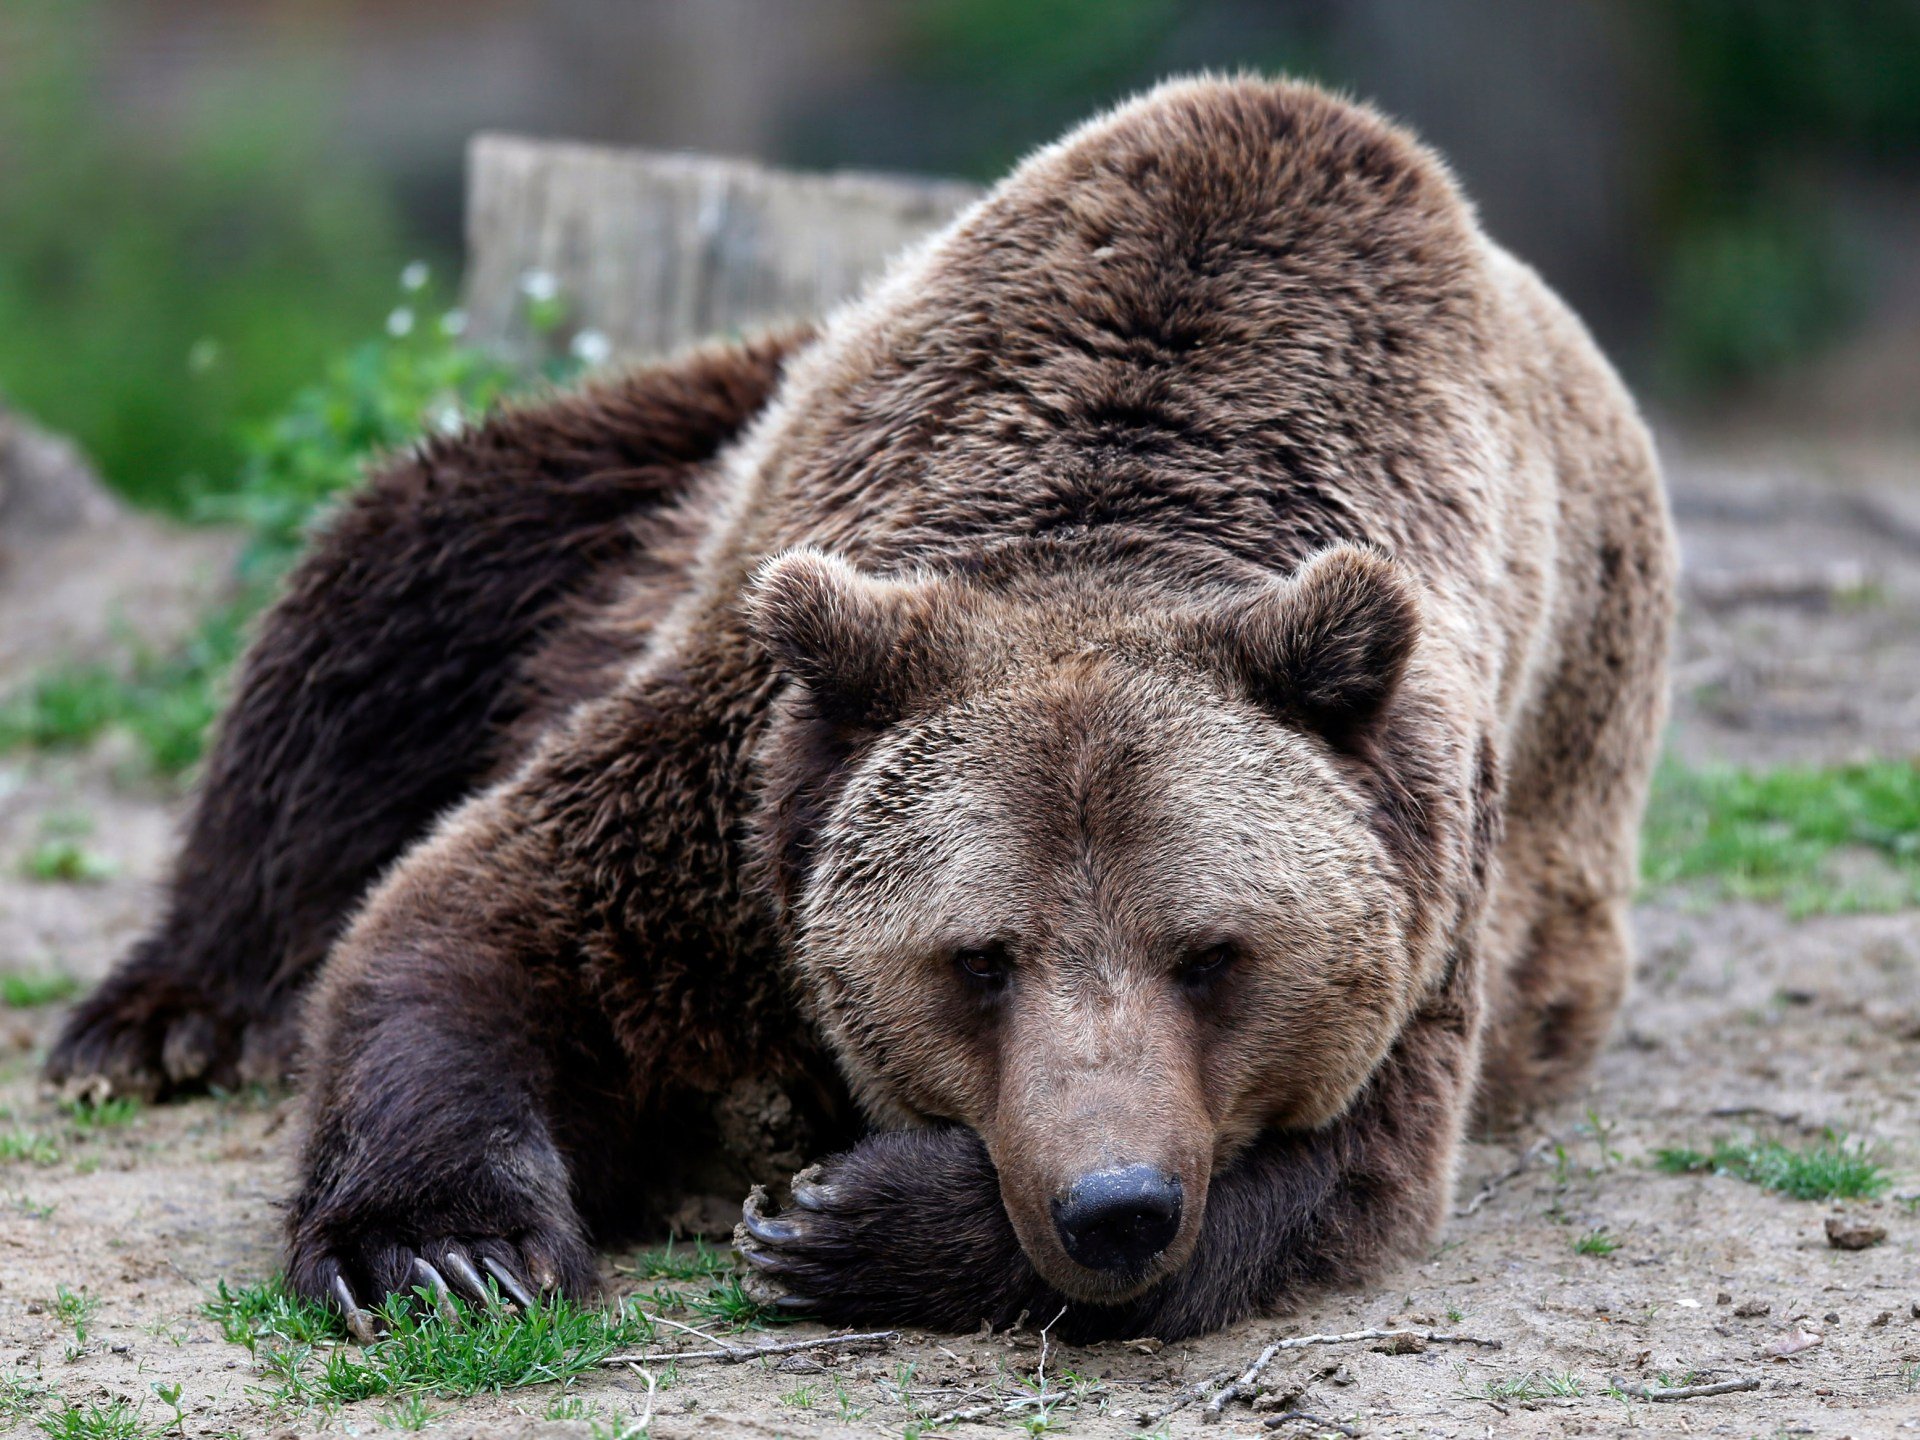 Romania to cull 500 bears to curb overpopulation after deadly attack